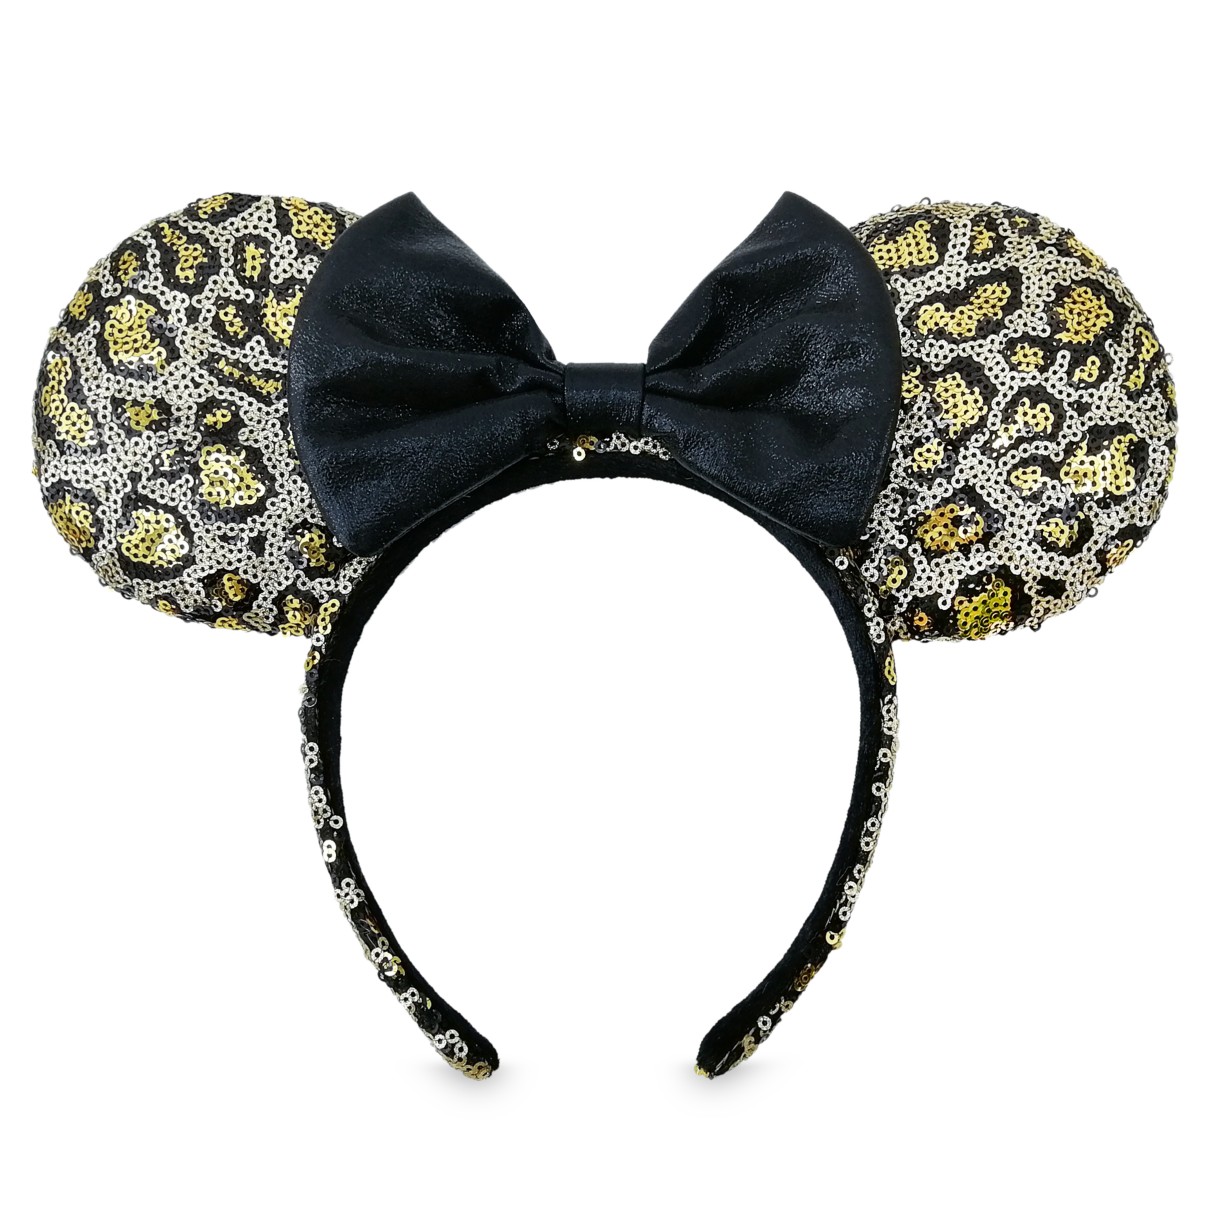 Minnie Mouse Sequined Leopard Print Ear Headband with Bow